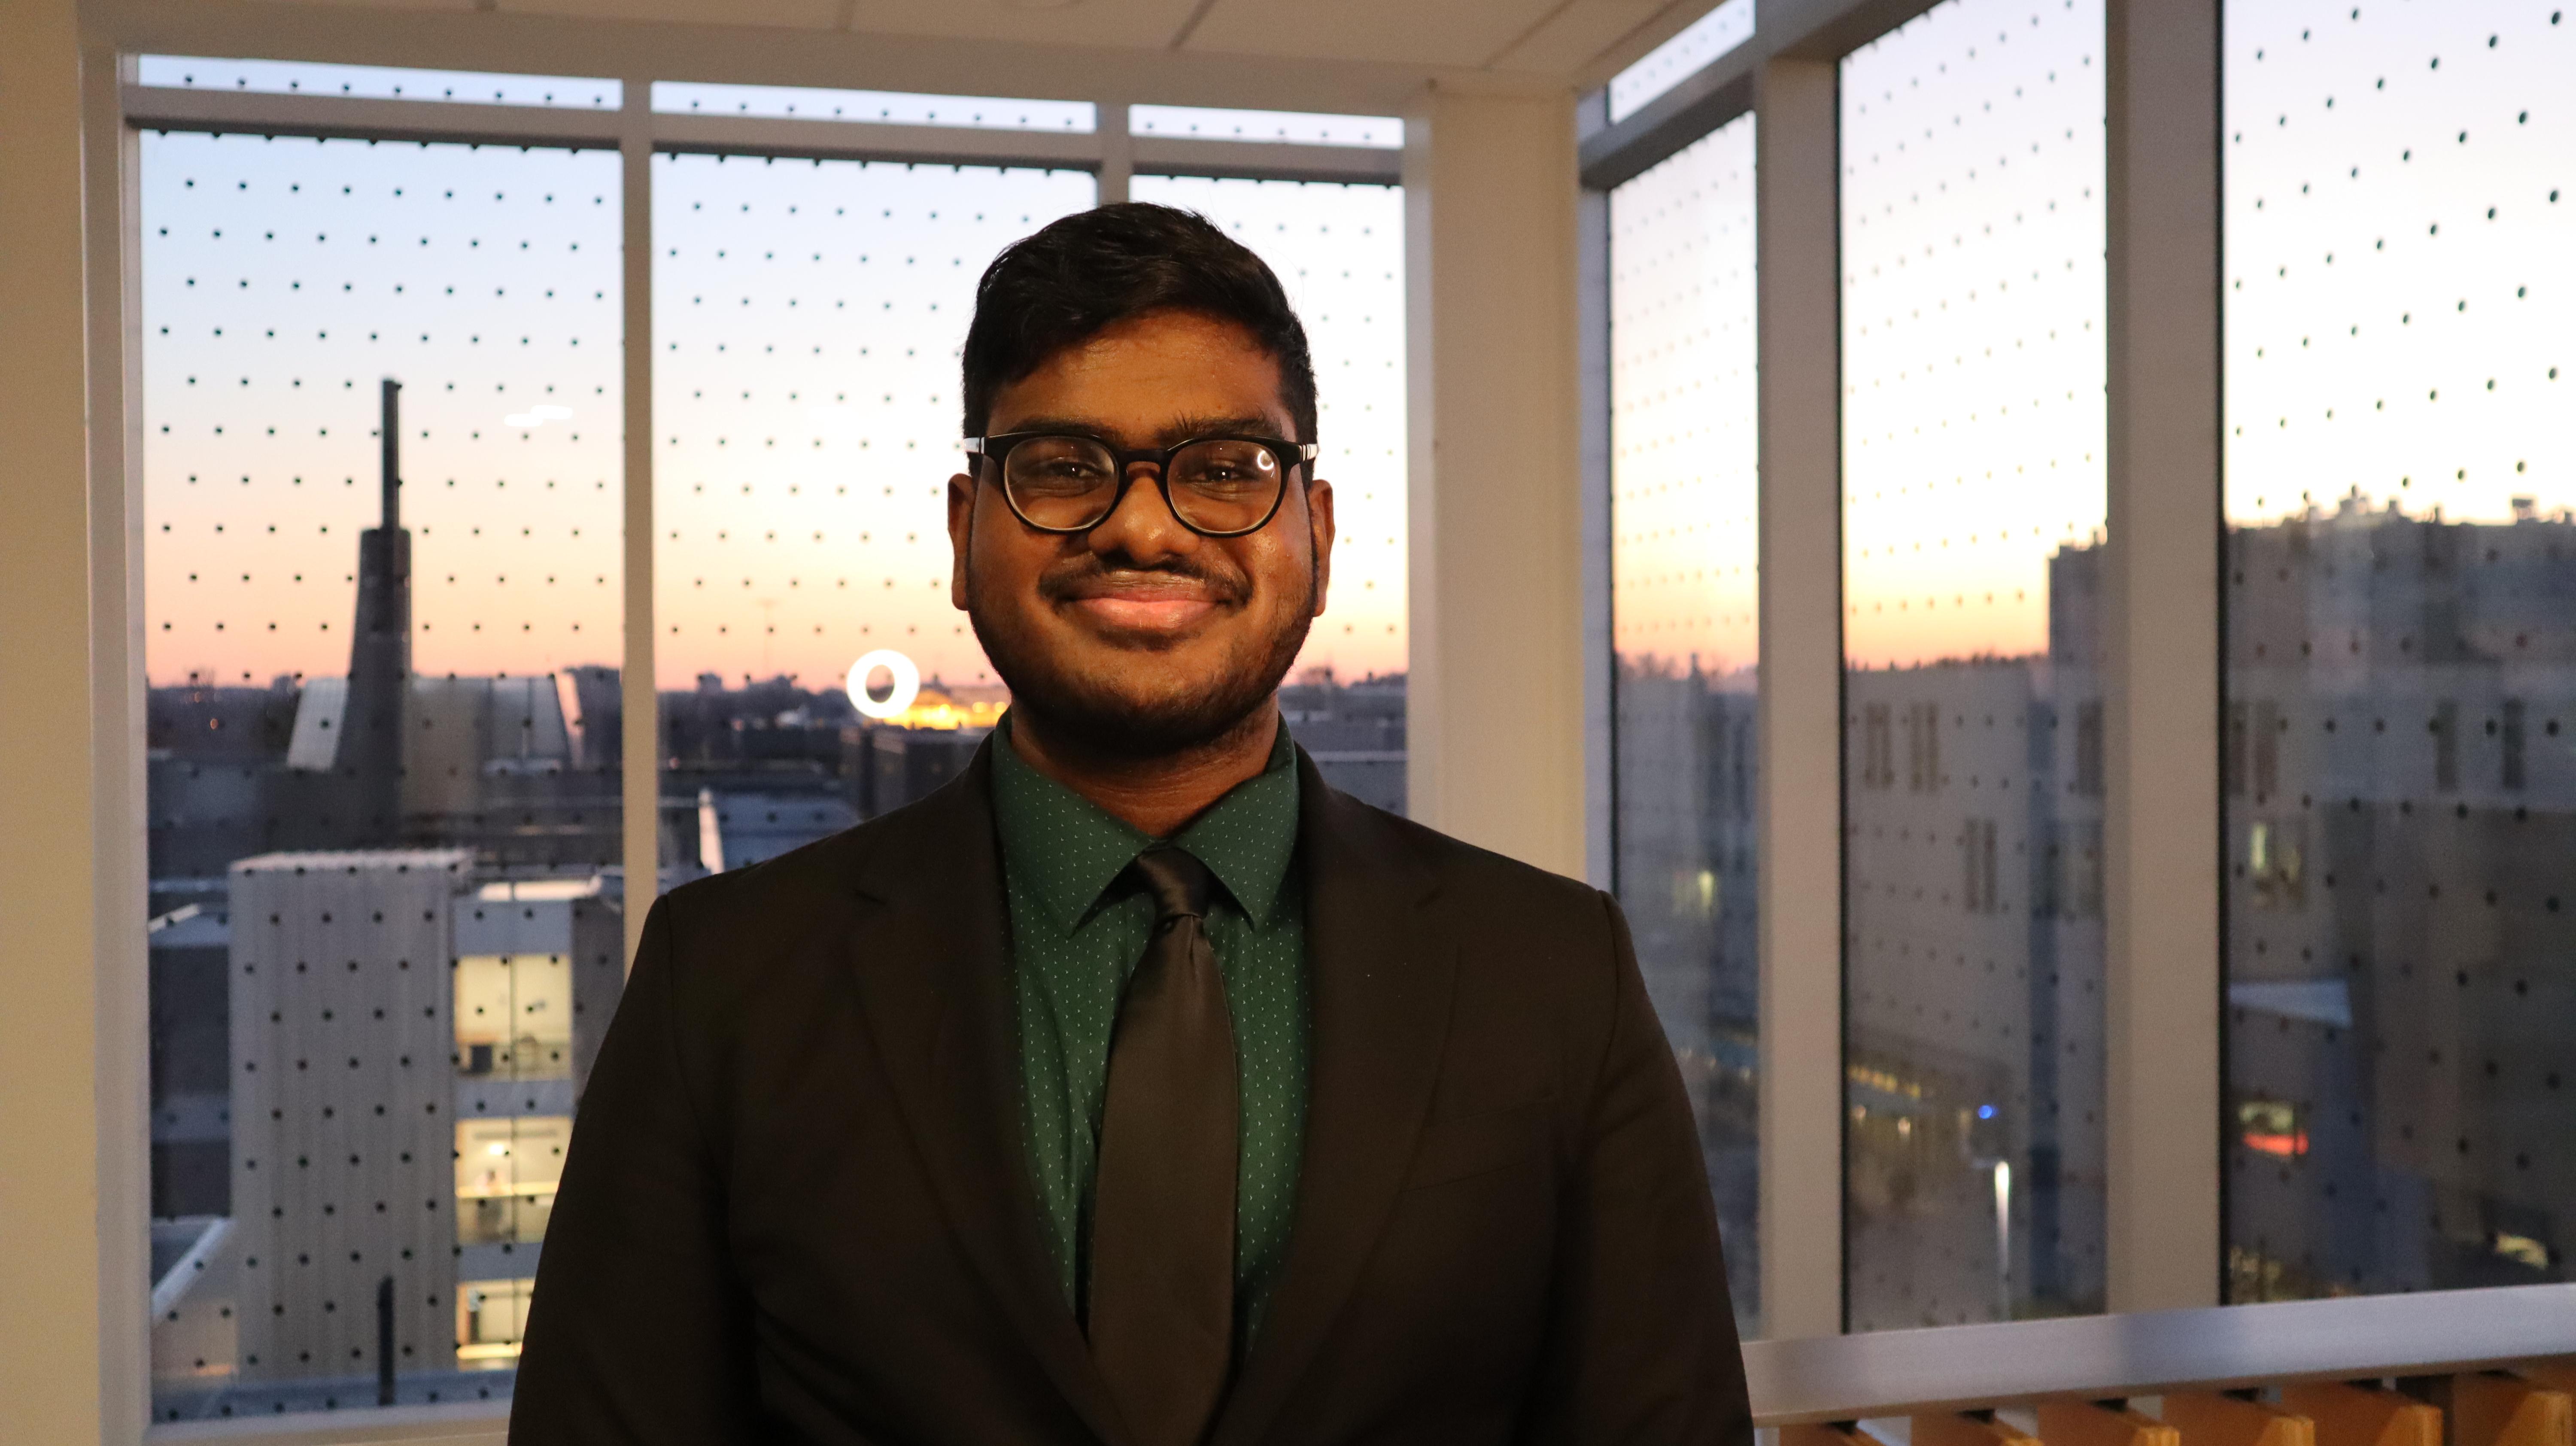 Congratulations to Bavan Pushpalingam, a 2nd-year UTSC student majoring in Public Policy, for being nominated to represent Canada at the G7 Youth Summit in Rome in May 2024!